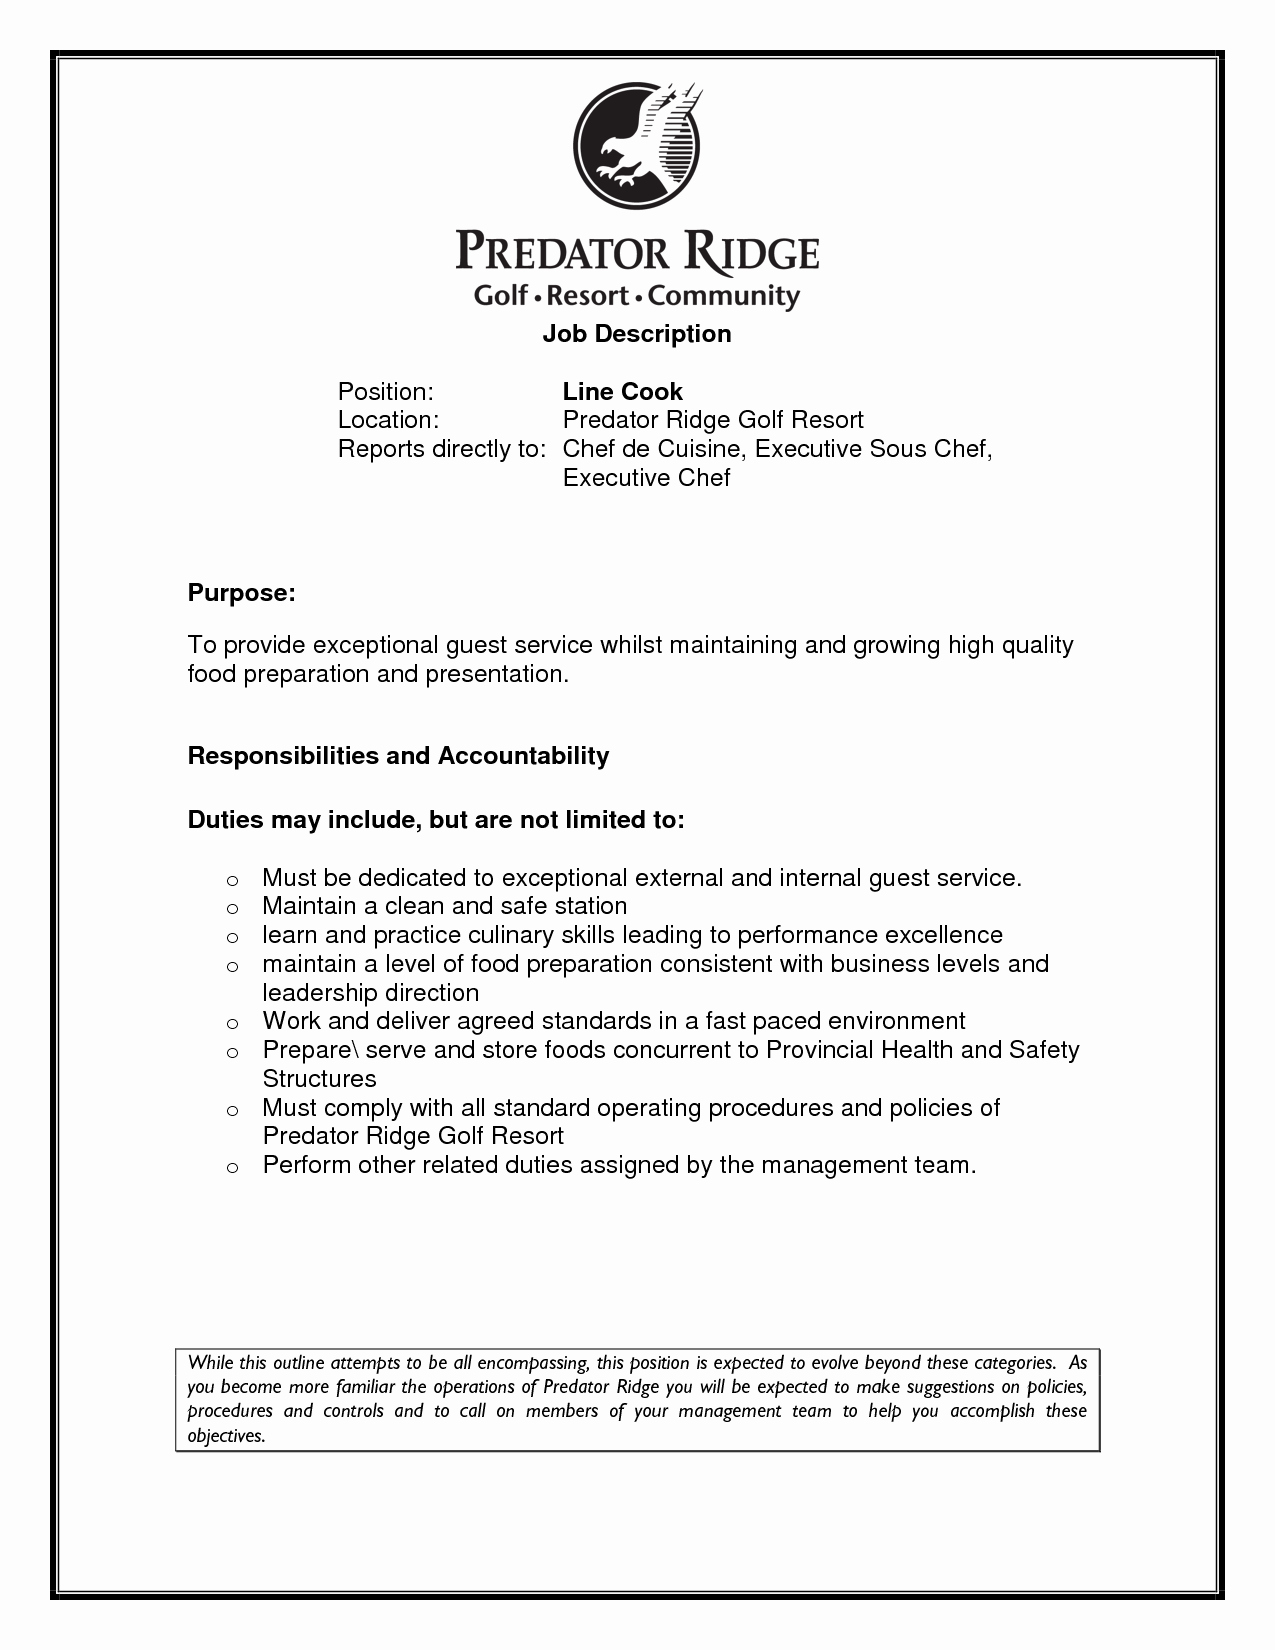 Cook Description for Resume Awesome Line Cook Responsibilities Resume Resume Ideas